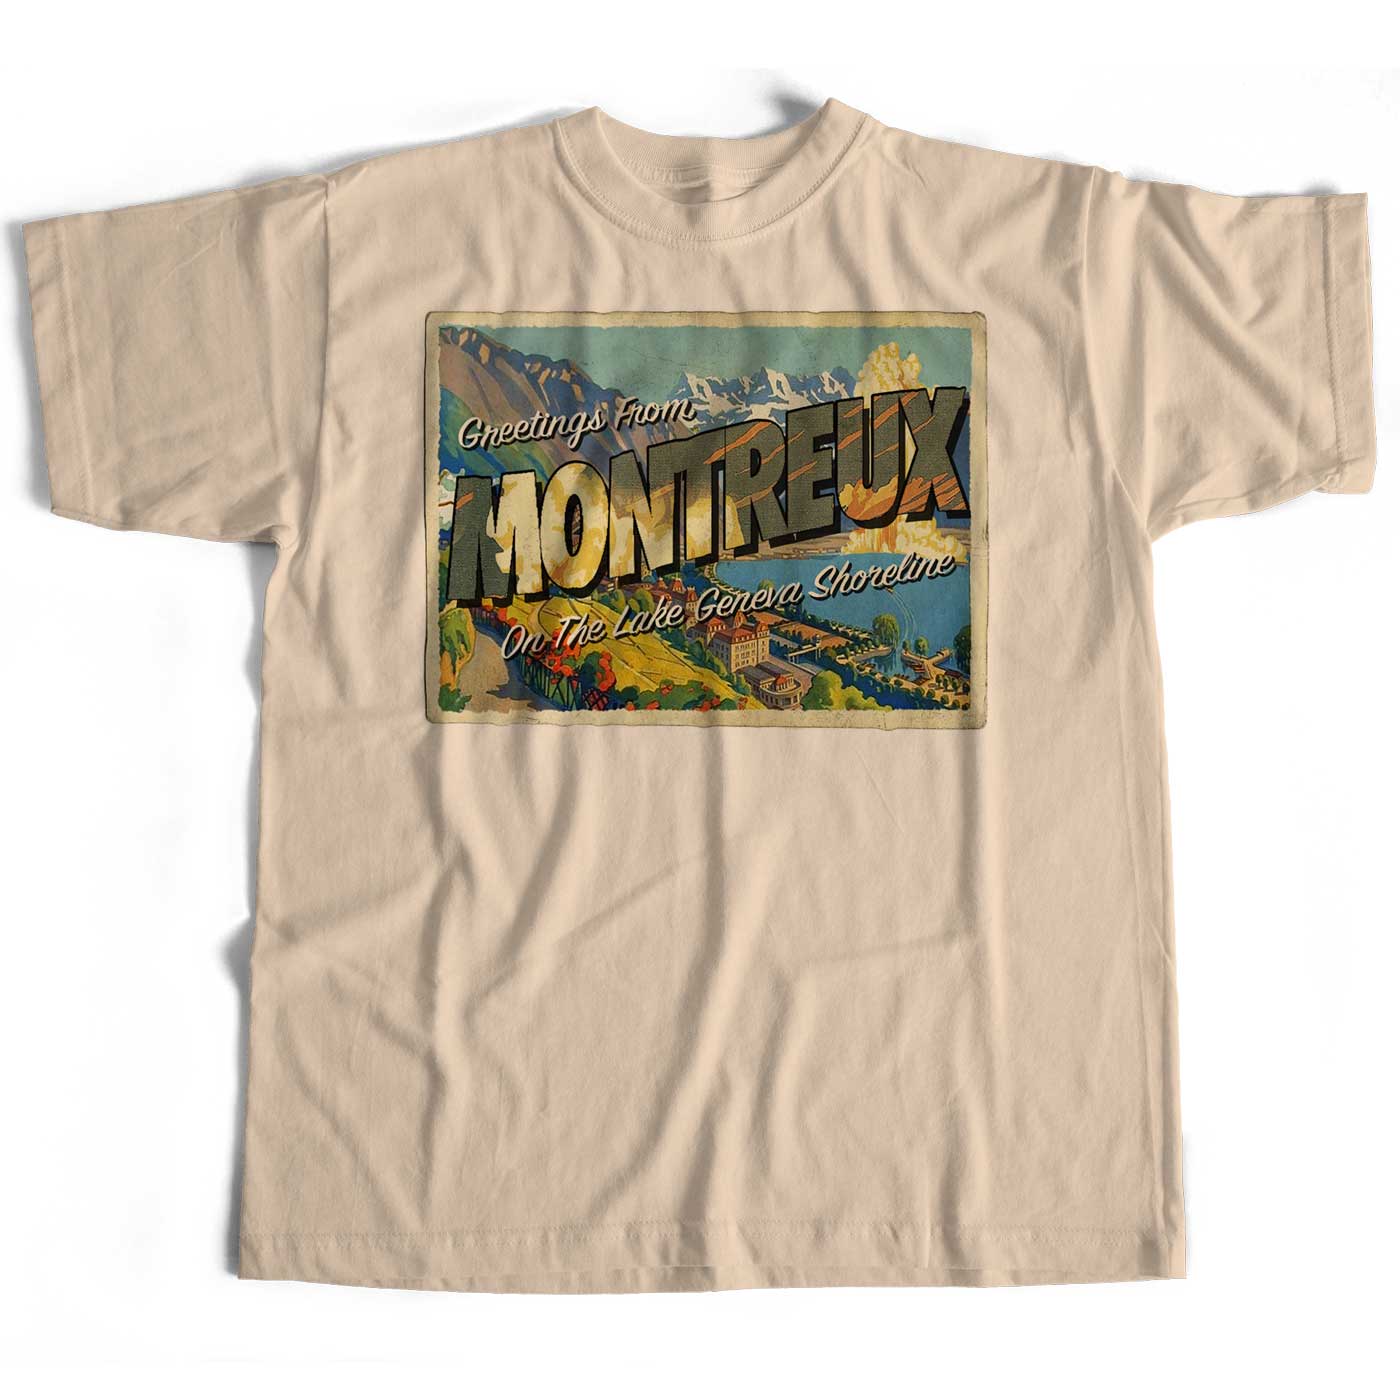 Greetings From Montreux T Shirt - On The Lake Geneva Shoreline An Old Skool Hooligans Rock Postcard